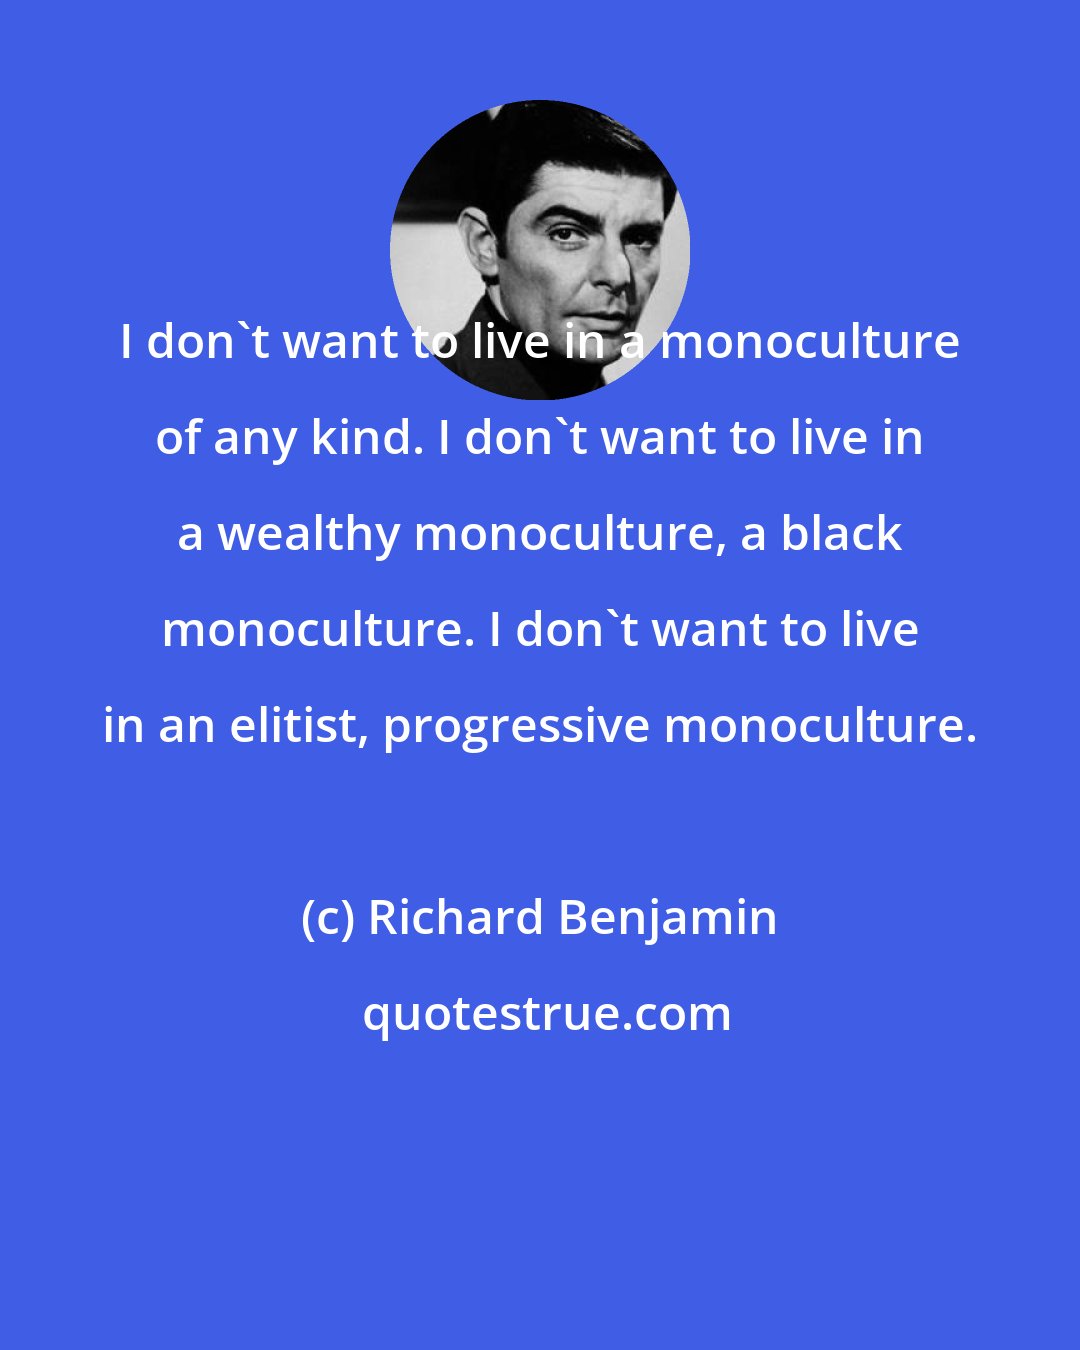 Richard Benjamin: I don't want to live in a monoculture of any kind. I don't want to live in a wealthy monoculture, a black monoculture. I don't want to live in an elitist, progressive monoculture.